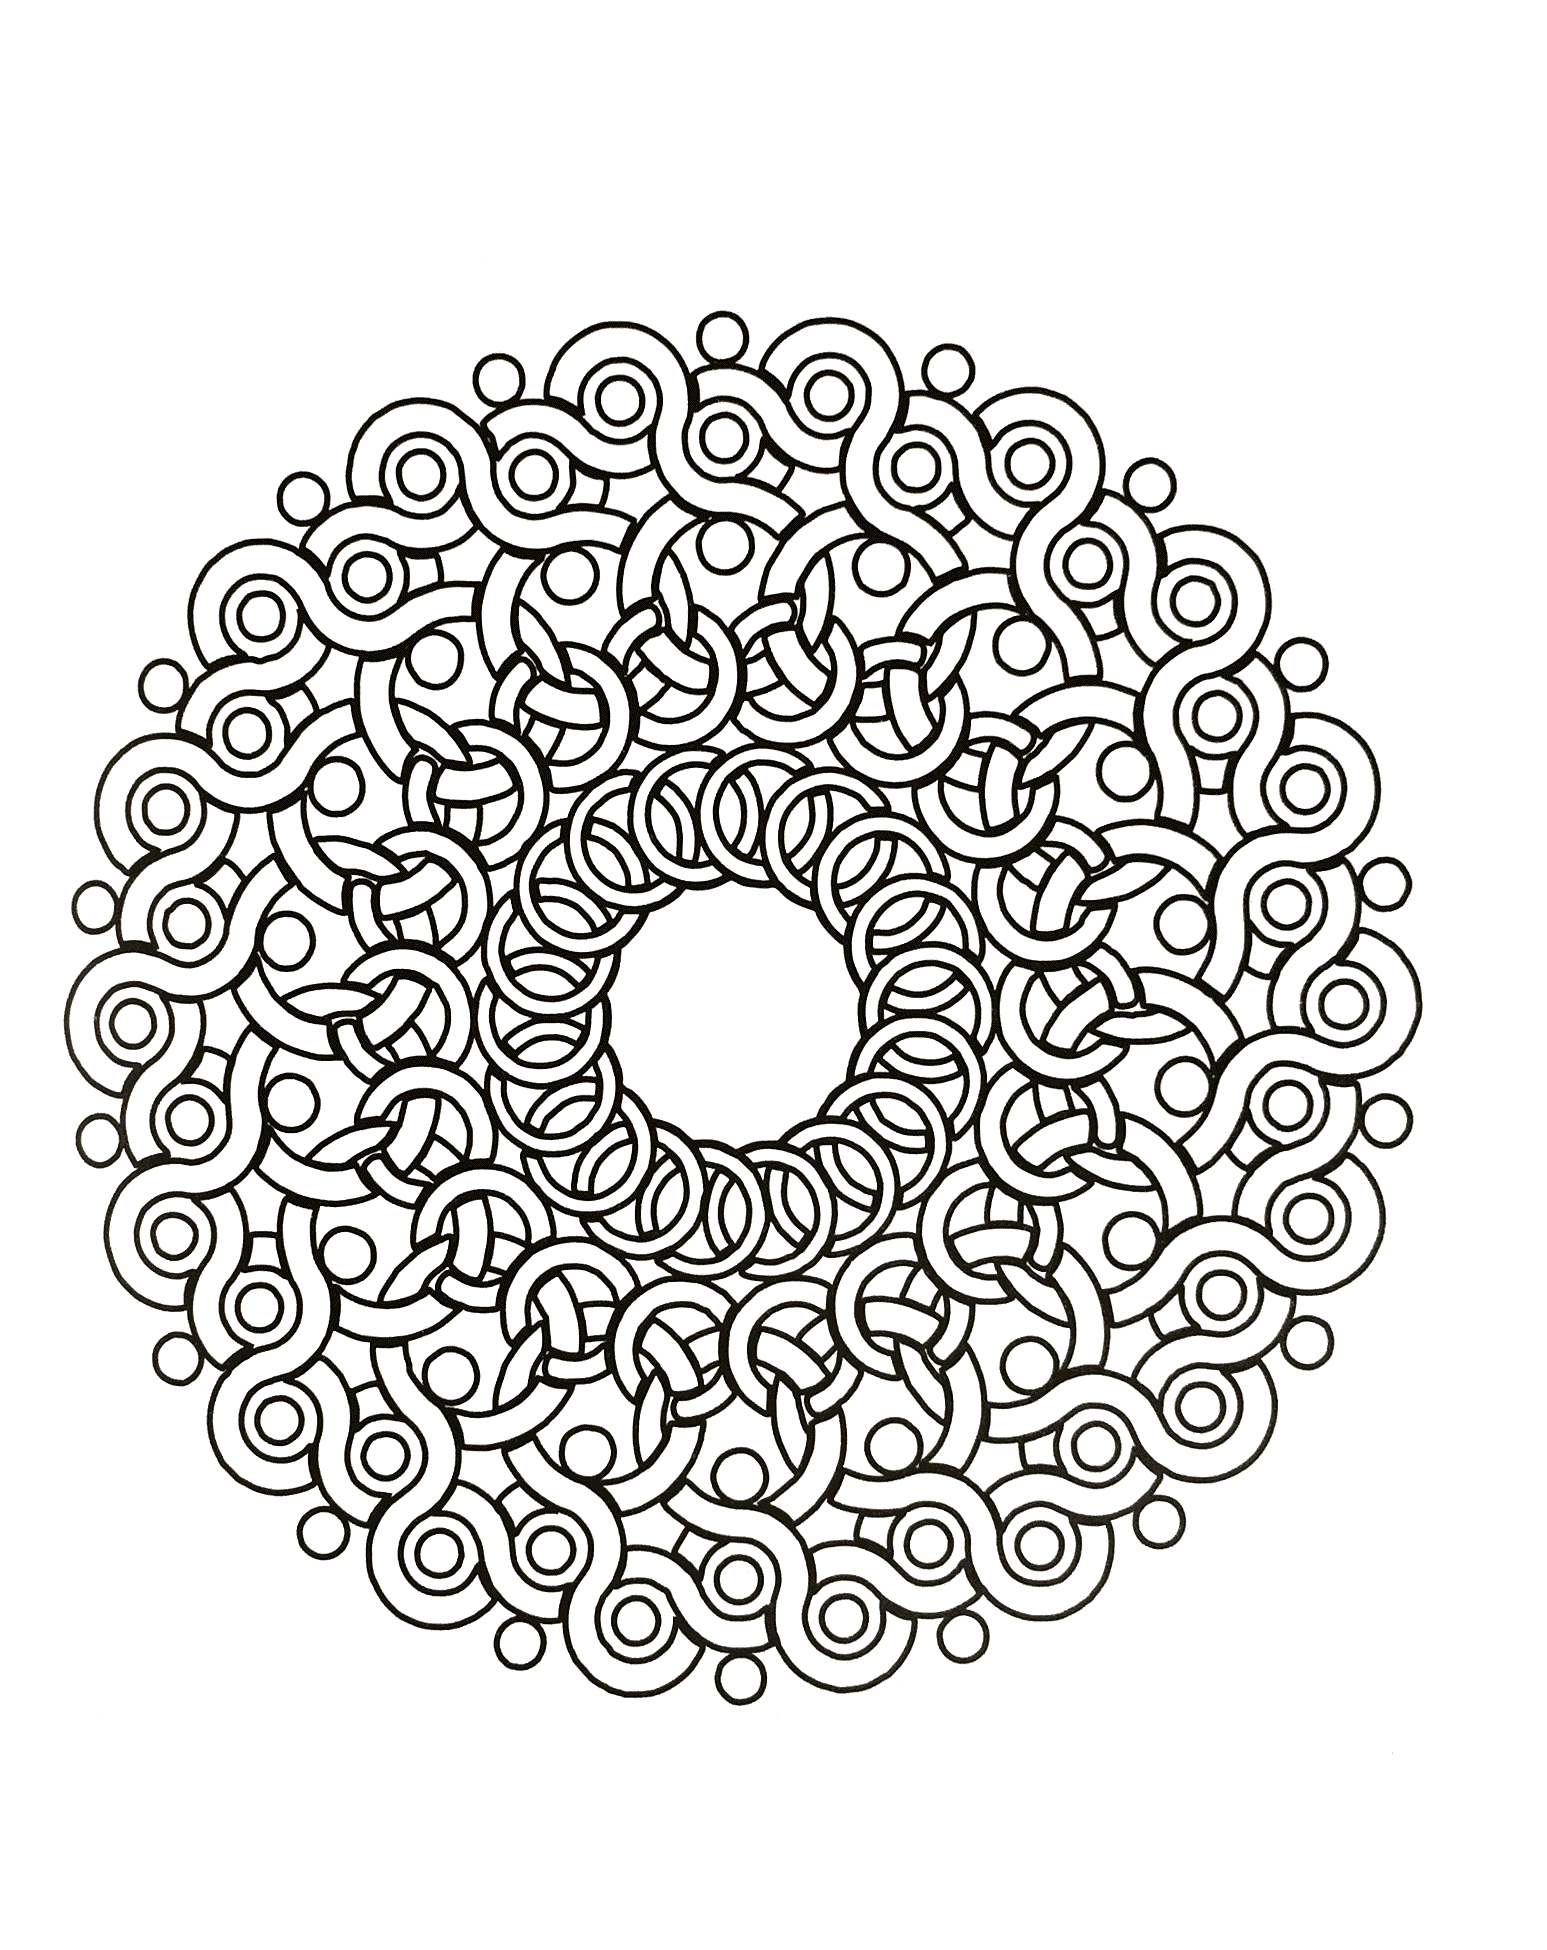 Mandalas to download for free 30 - M&alas Adult Coloring Pages - Page 4